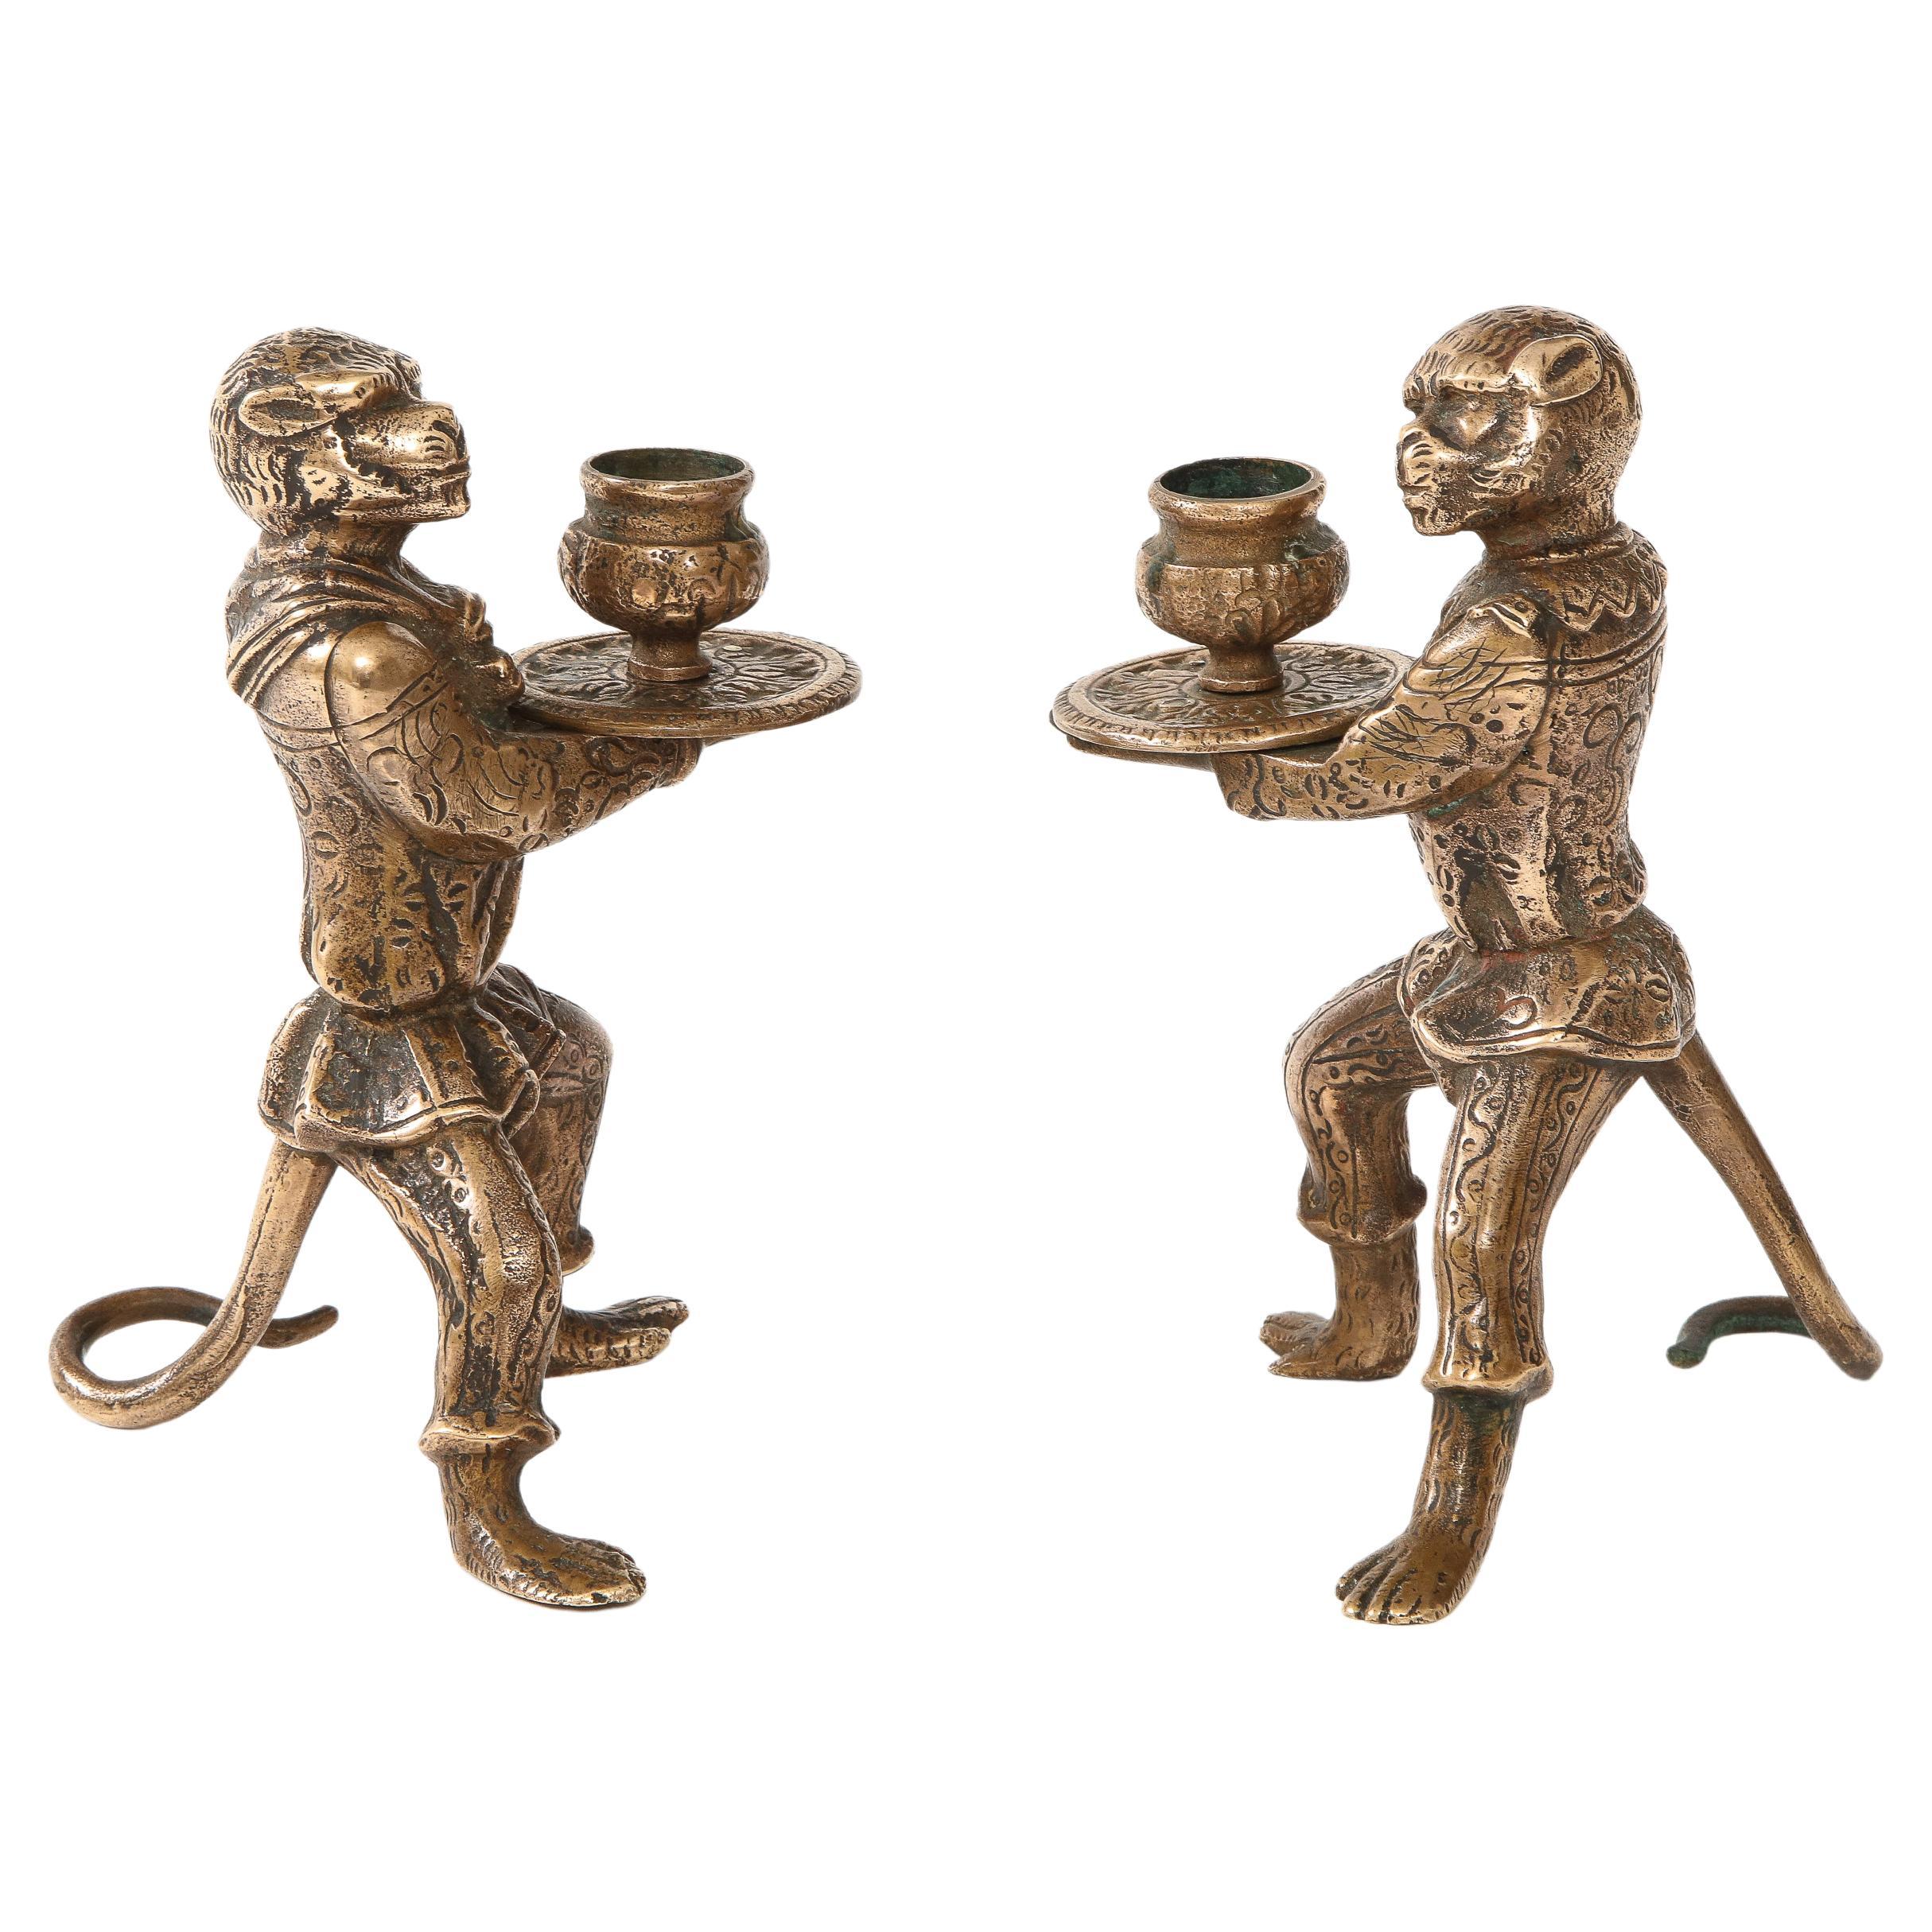 Beautiful pair of 1930s French bronze monkey candle holders, in vintage condition lightly hand polished with some wear and patina due to age and use.